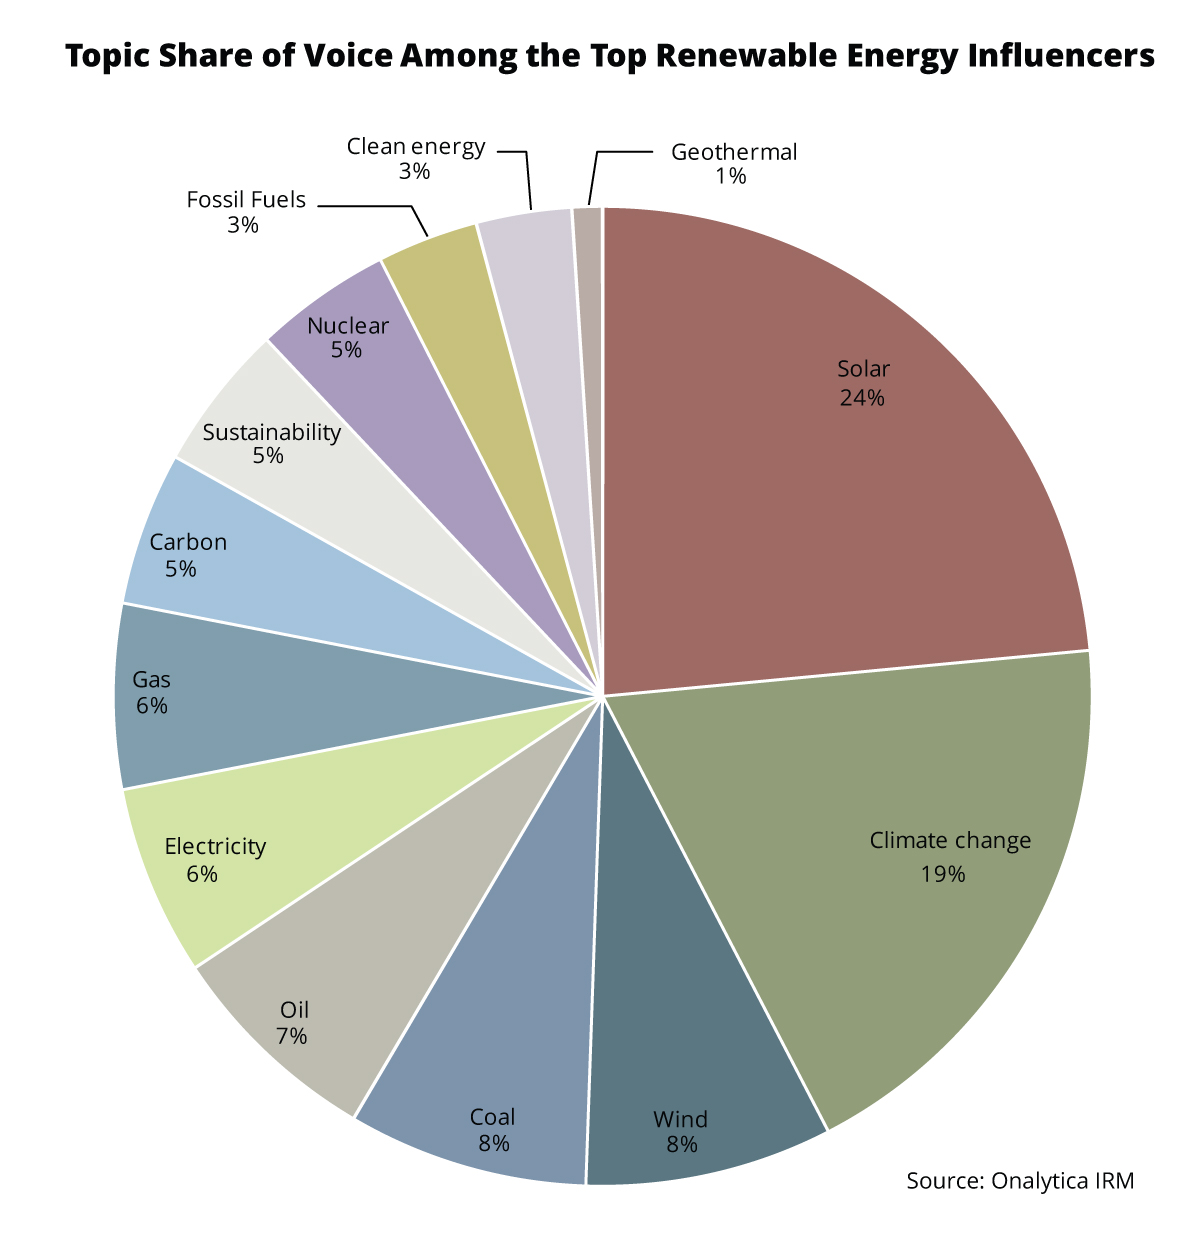 Onalytica Renewable Energy Top 100 infl;uencers and Brands - Topic share of voice among top renewable energy influencers